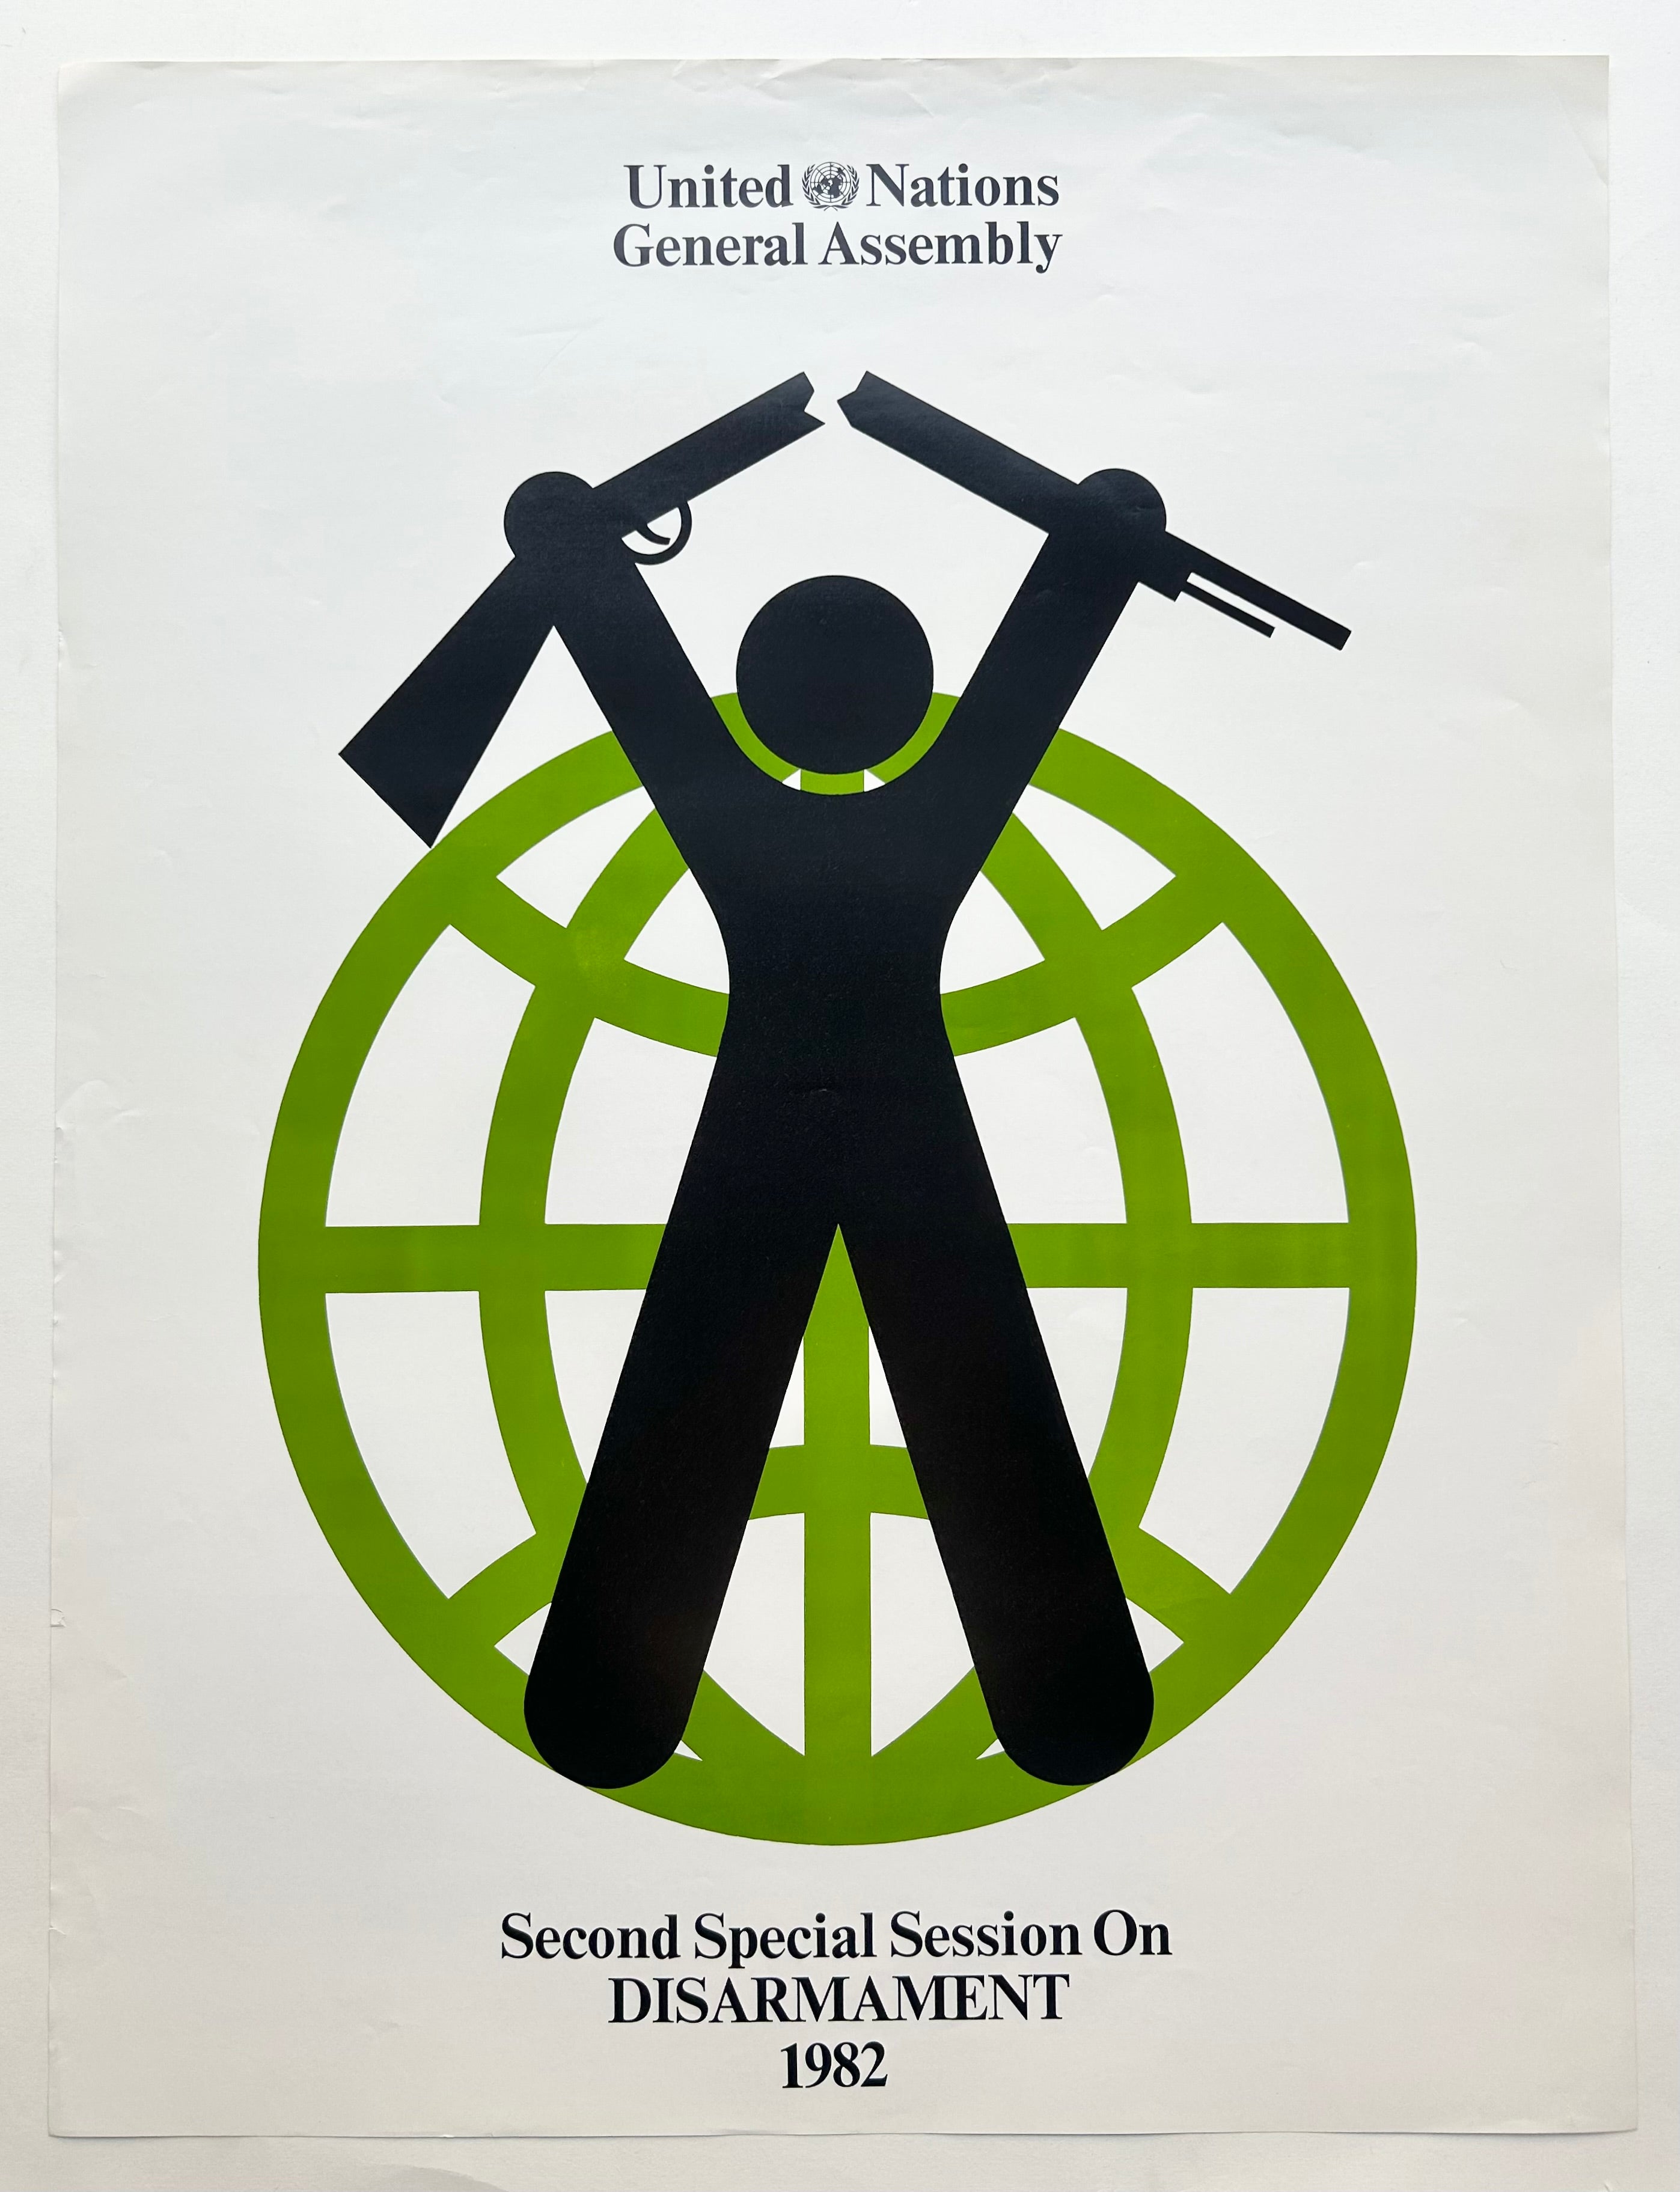 White background with a light green globe outline and an outline of a man in black breaking a rifle laid on top. 